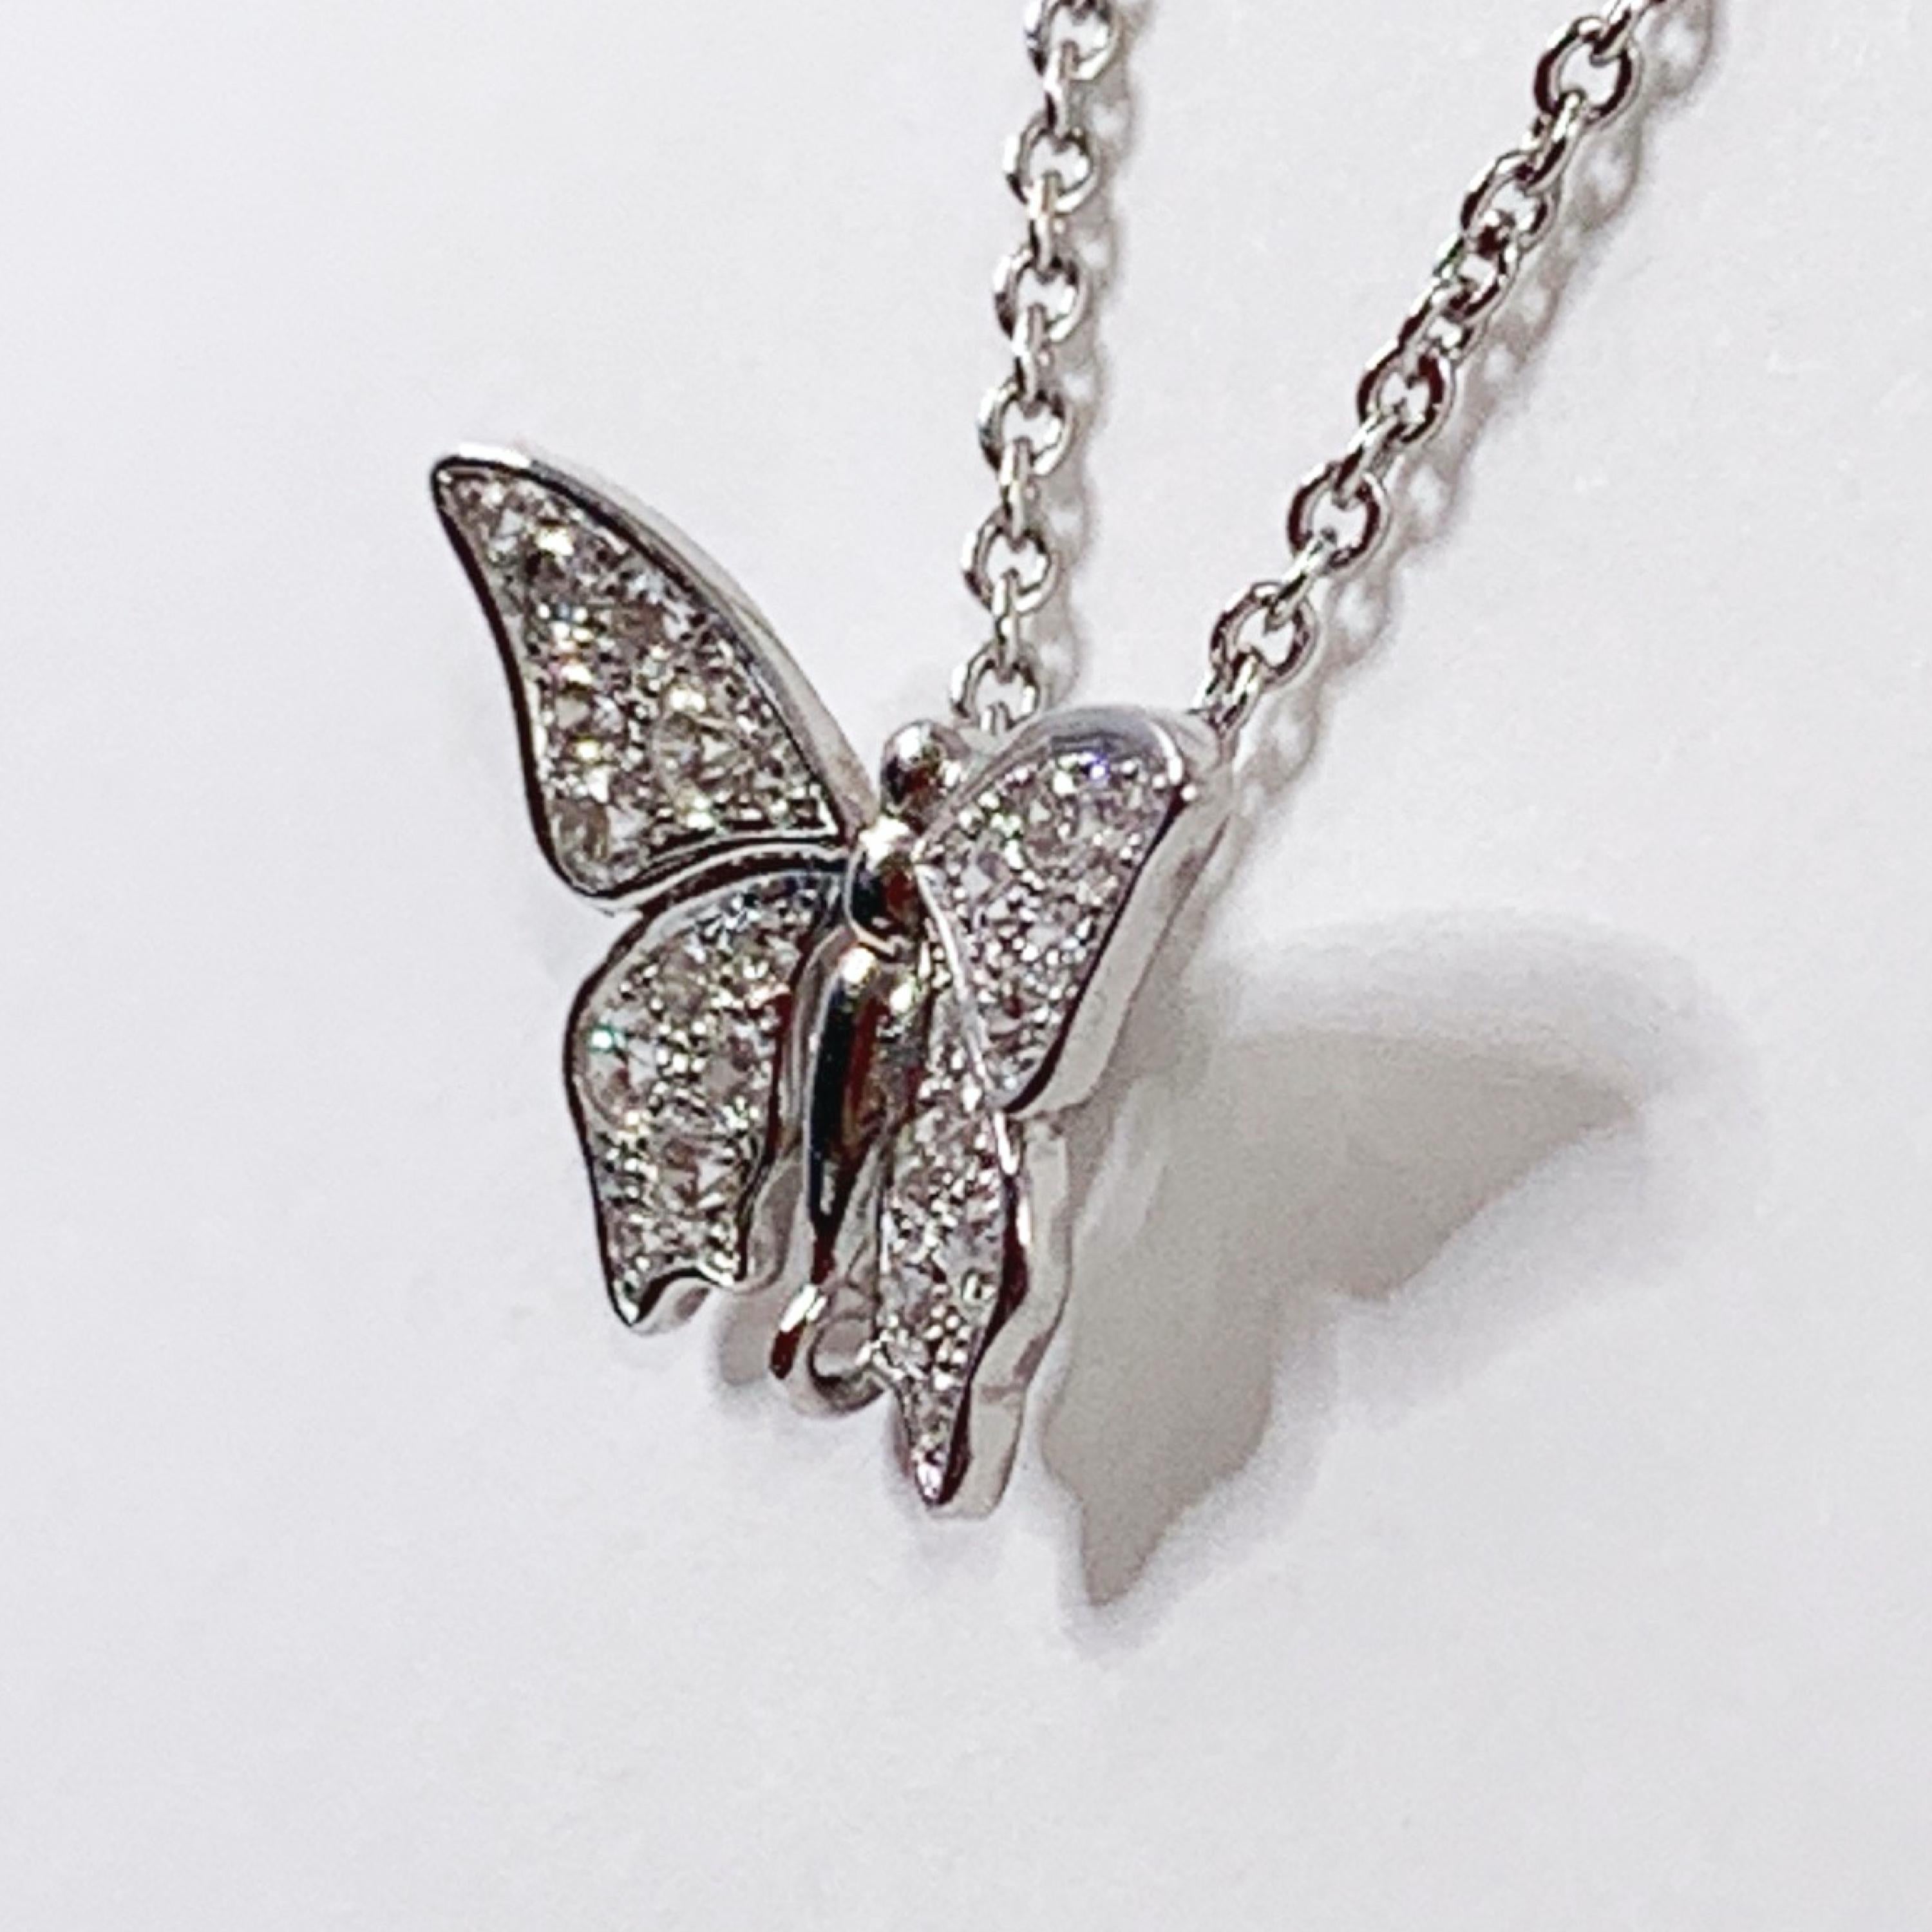 Handcrafted in Paris in the Maison Édéenne High Jewelry workshop, this Butterfly pendant is in 18K white gold and set with brilliant-cut white diamonds (F/G color, VVS clarity) totaling 0.60 carat. It hangs on a 42 cm / 16.5 inches chain in the same